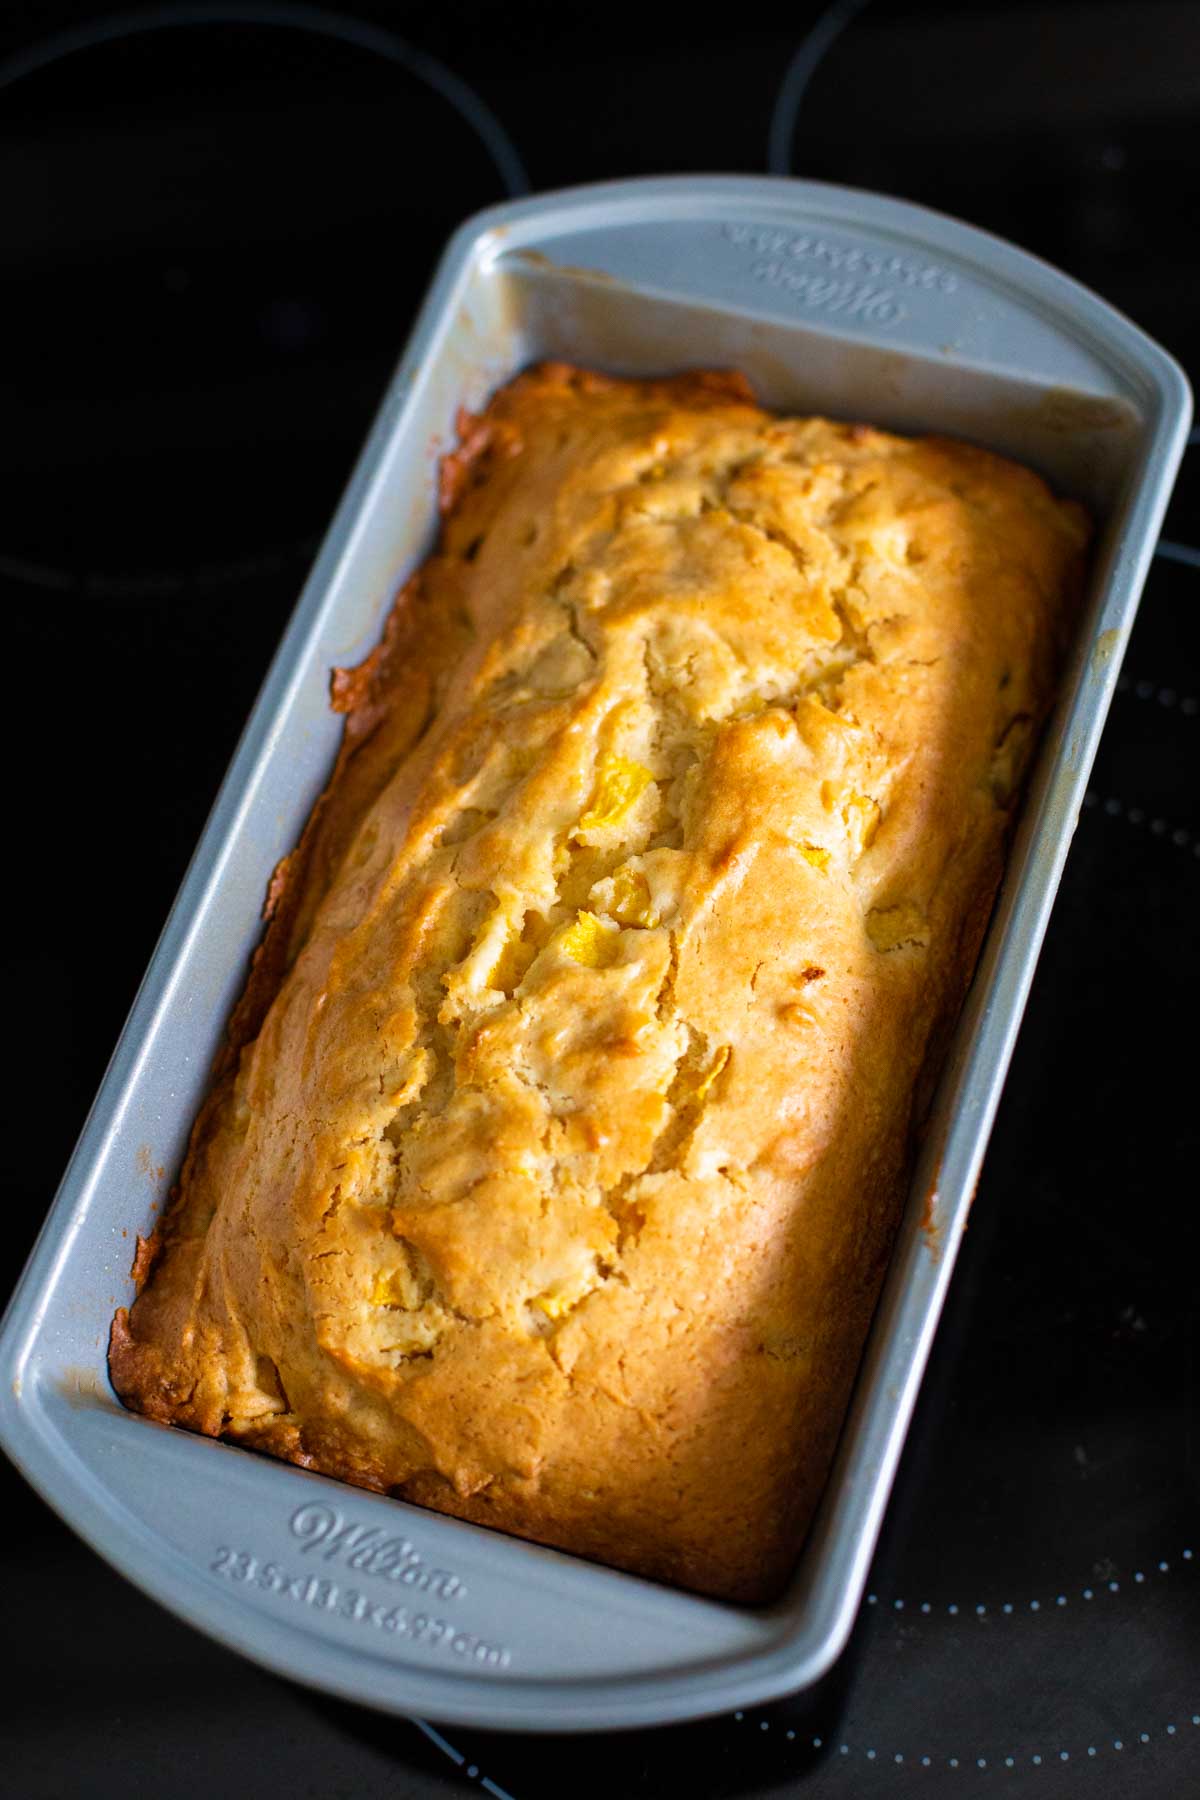 The baked peach bread is in a metal bread pan cooling on the stove top.